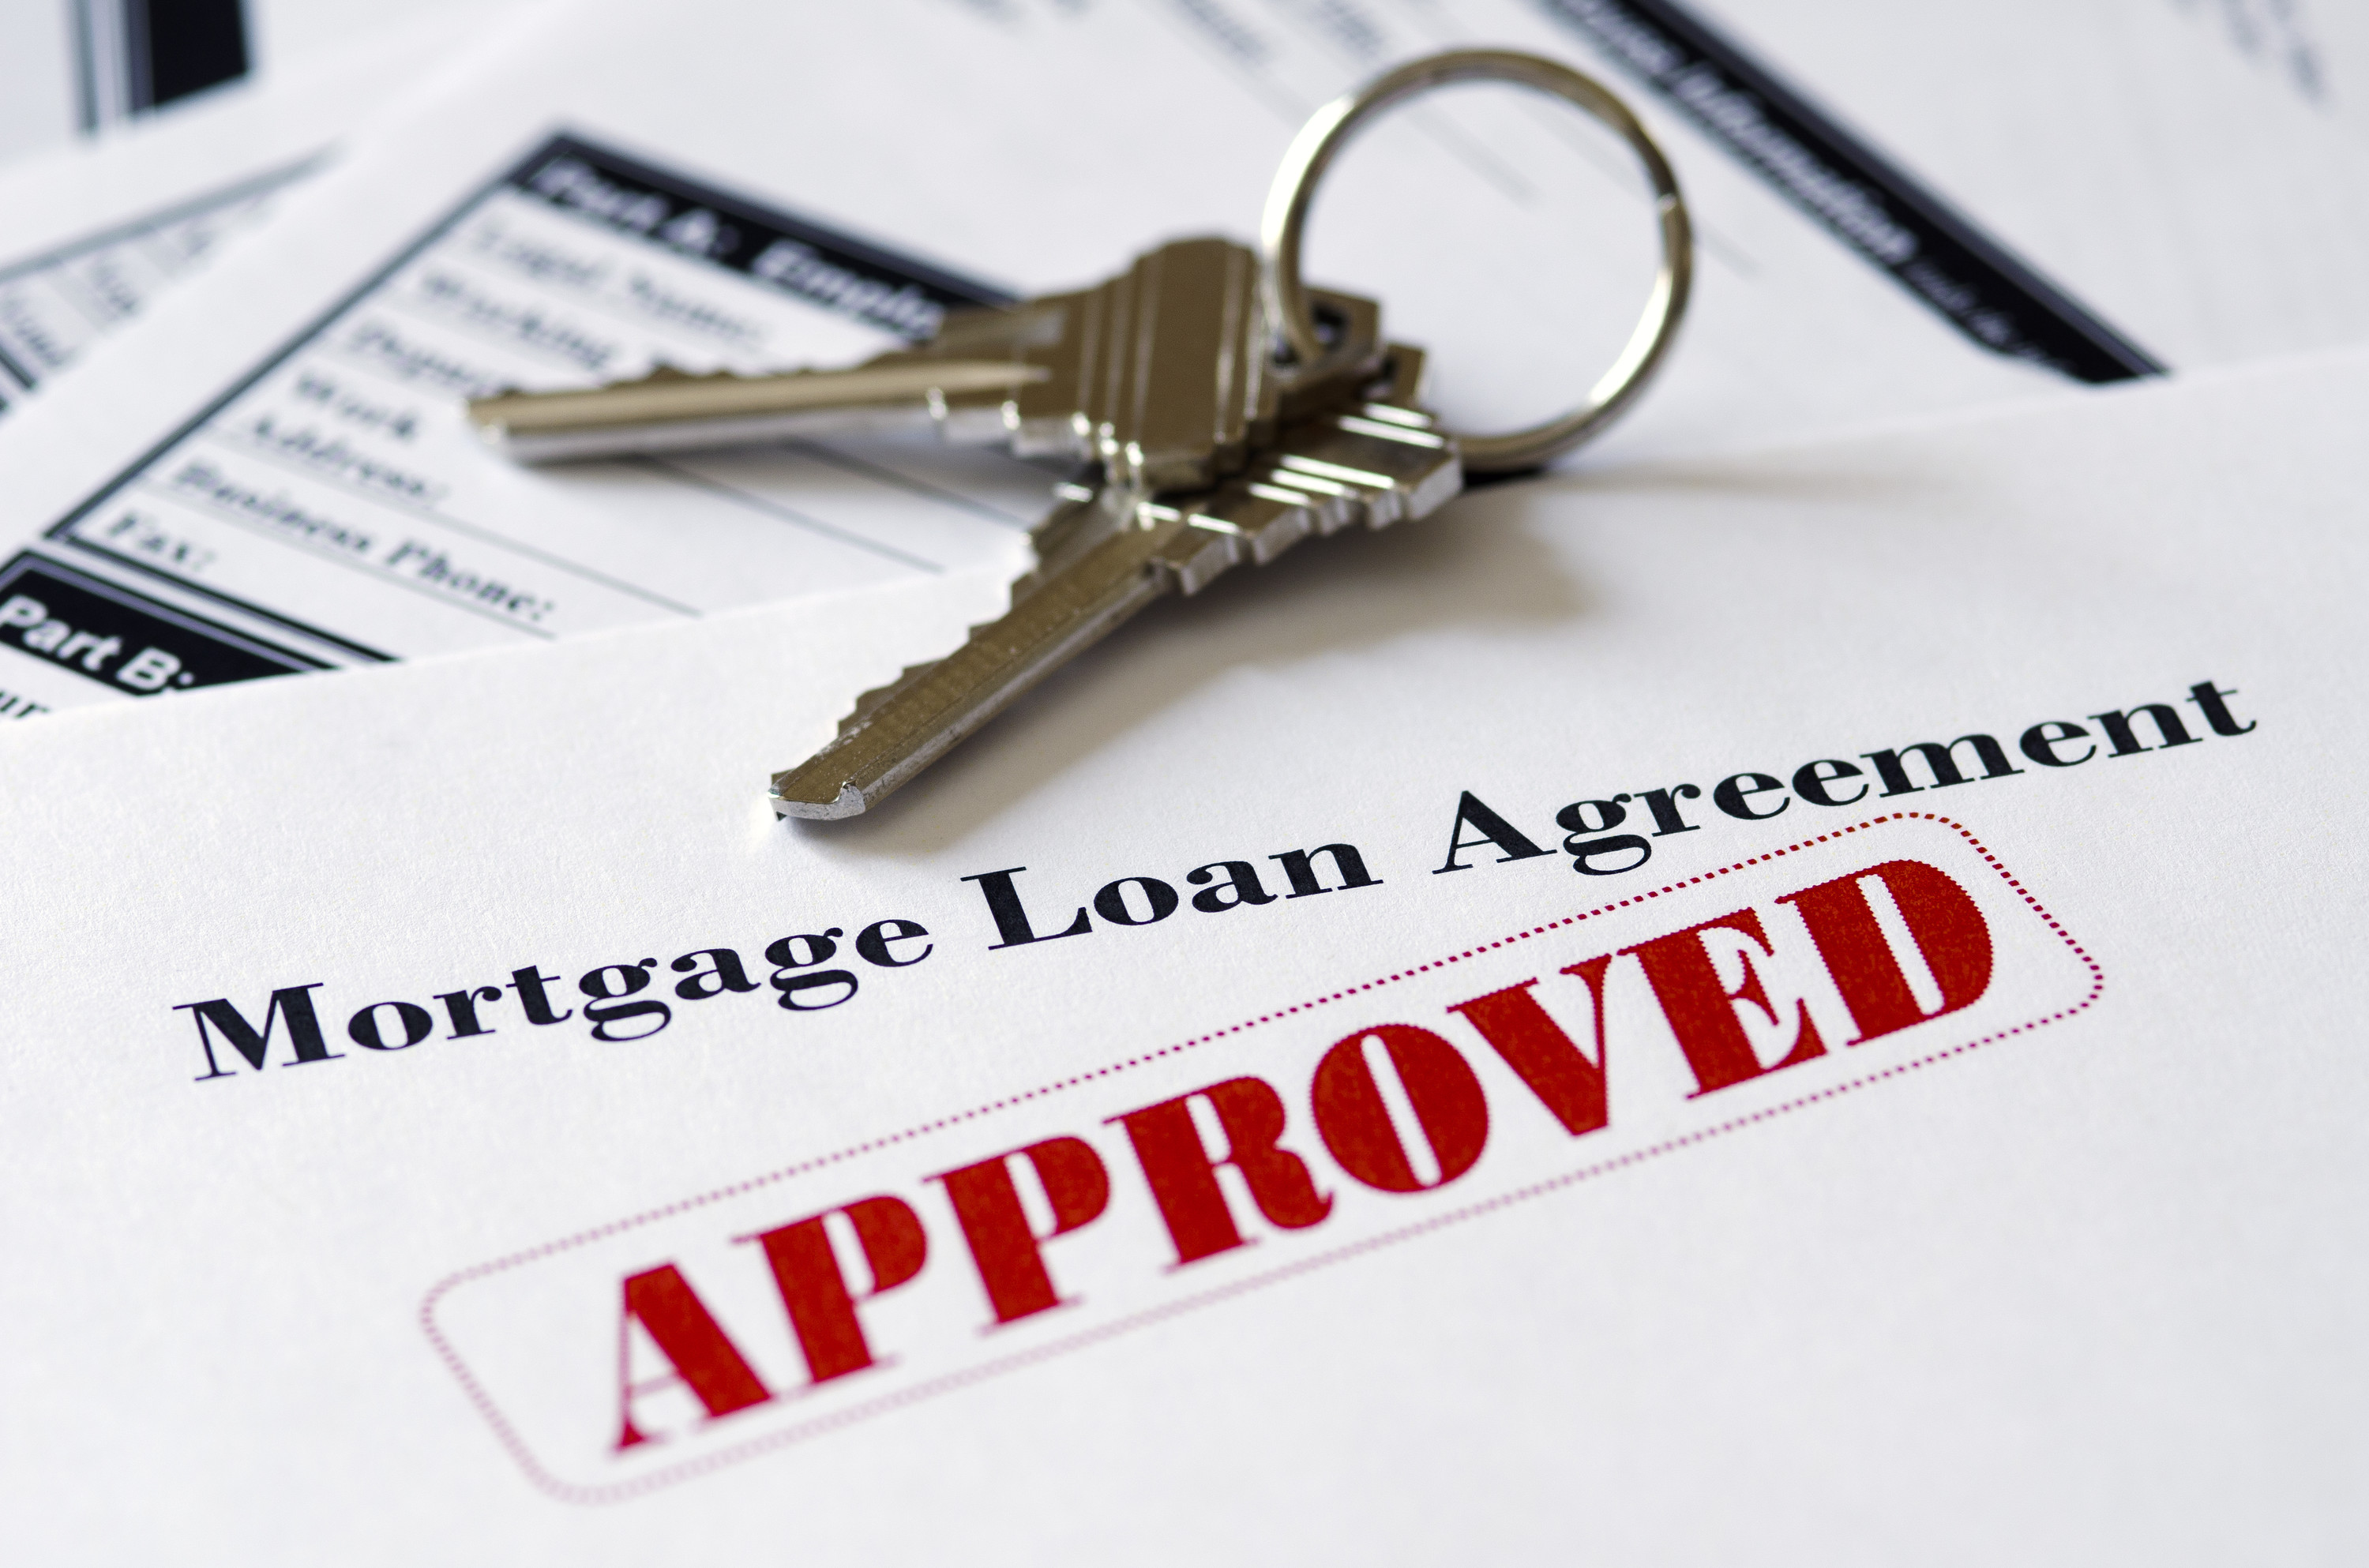 Down Payment Assistance Programs - Iron Point Mortgage